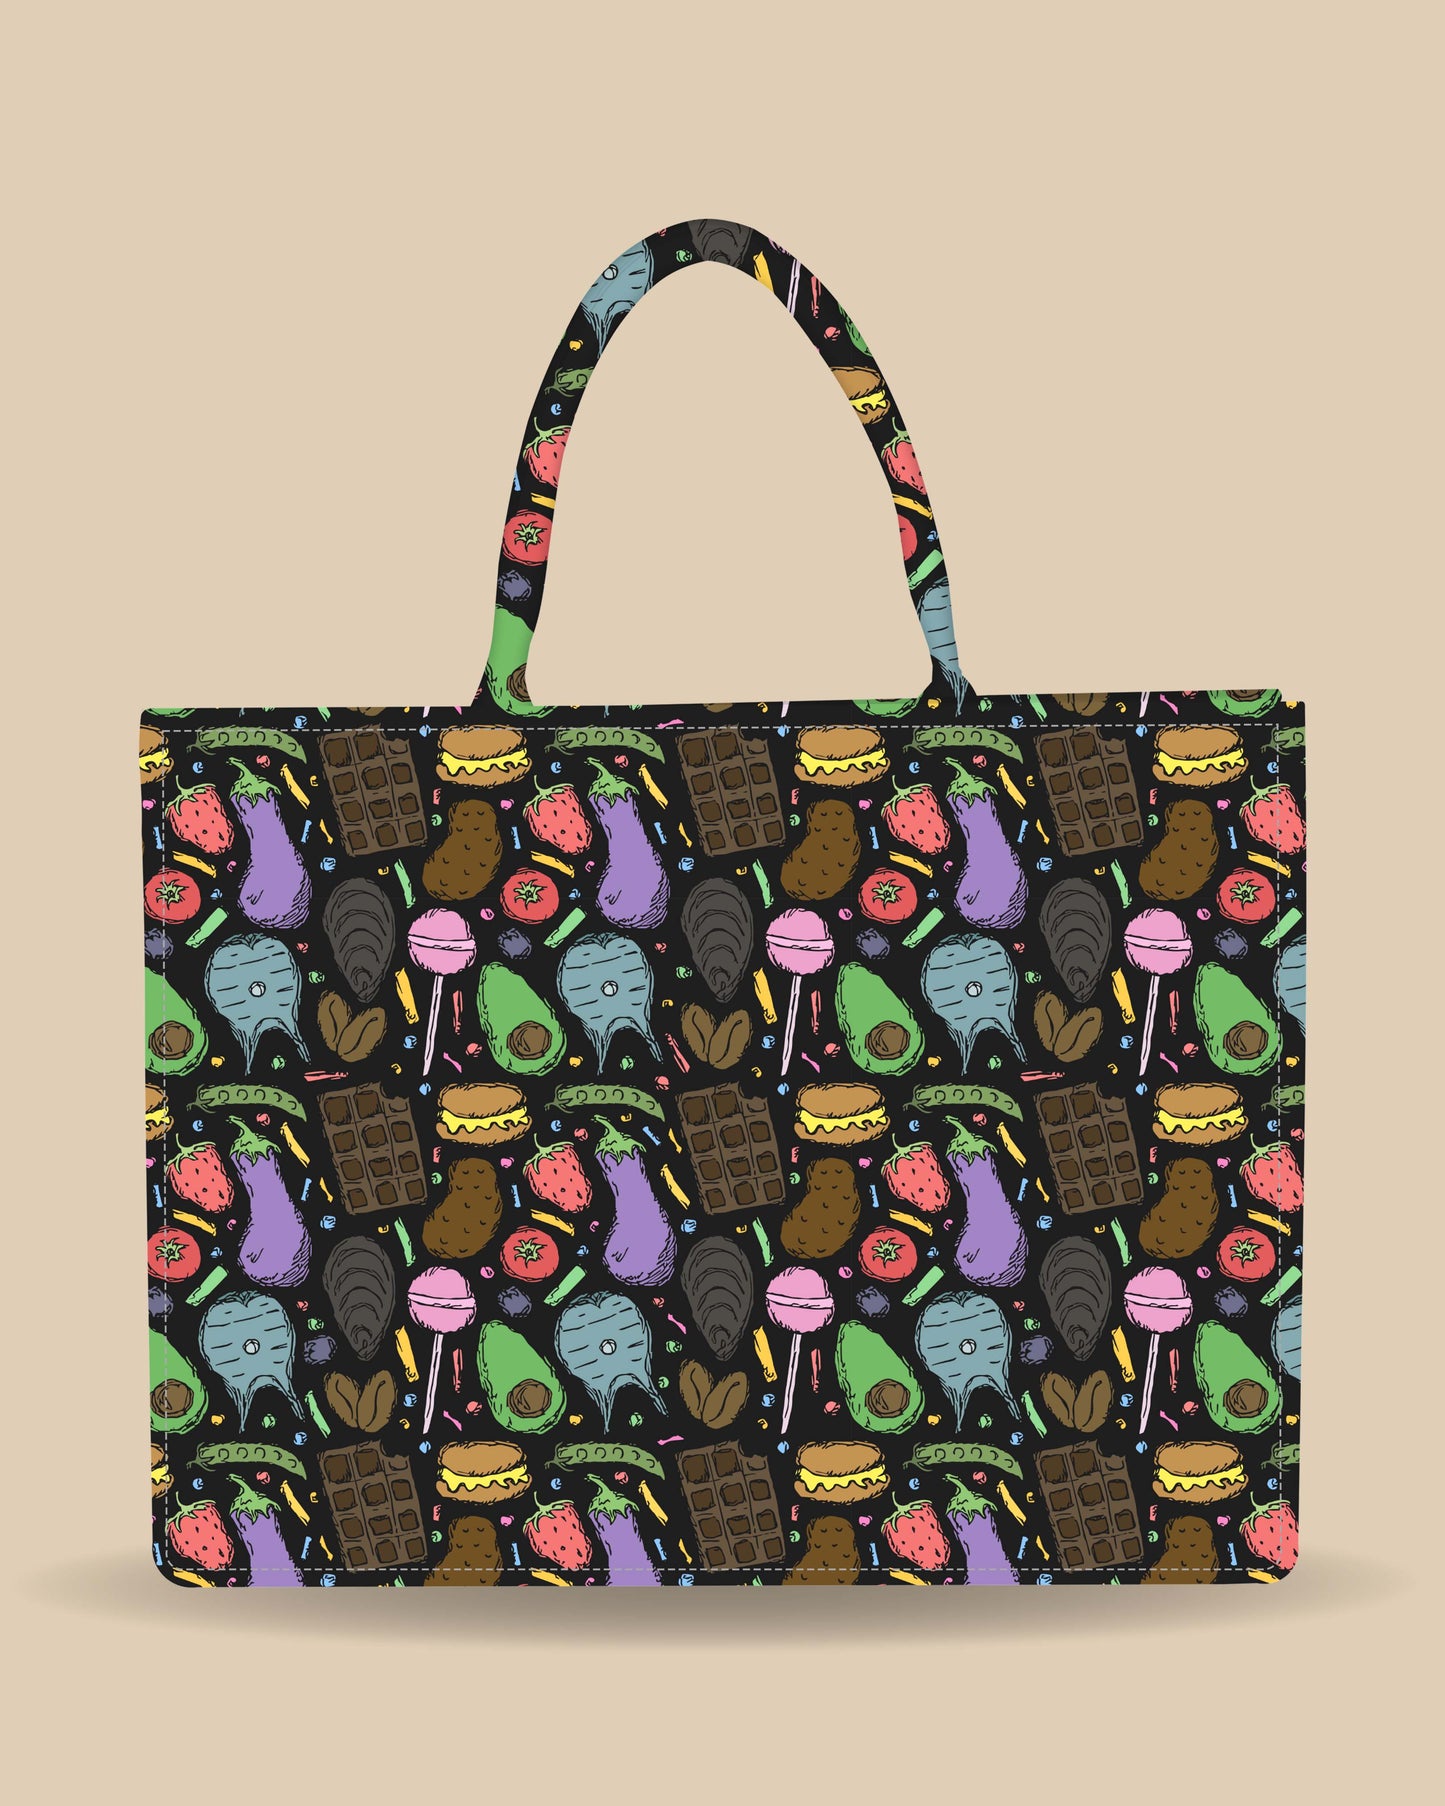 Tote Bag Designed With Cartoon Food Pattern